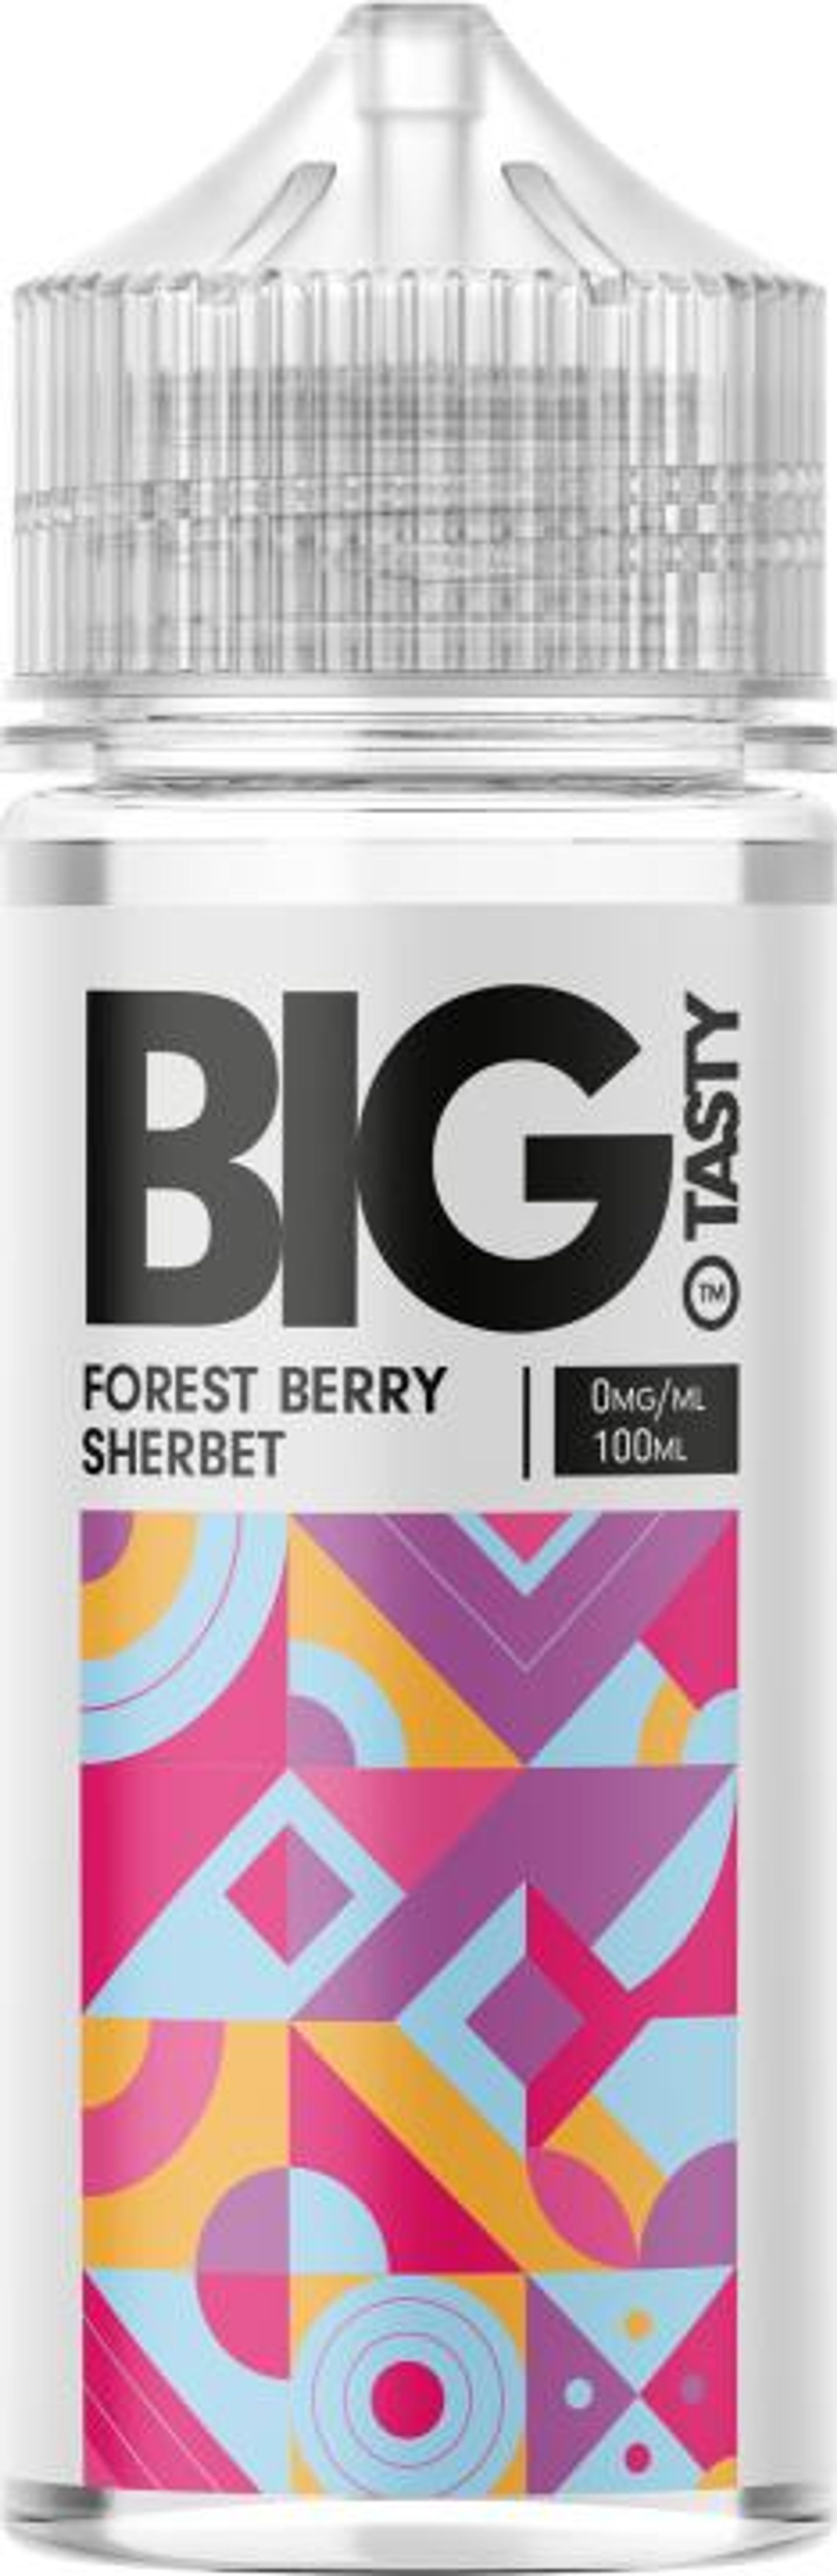 Image of Forest Berry Sherbert by Big Tasty